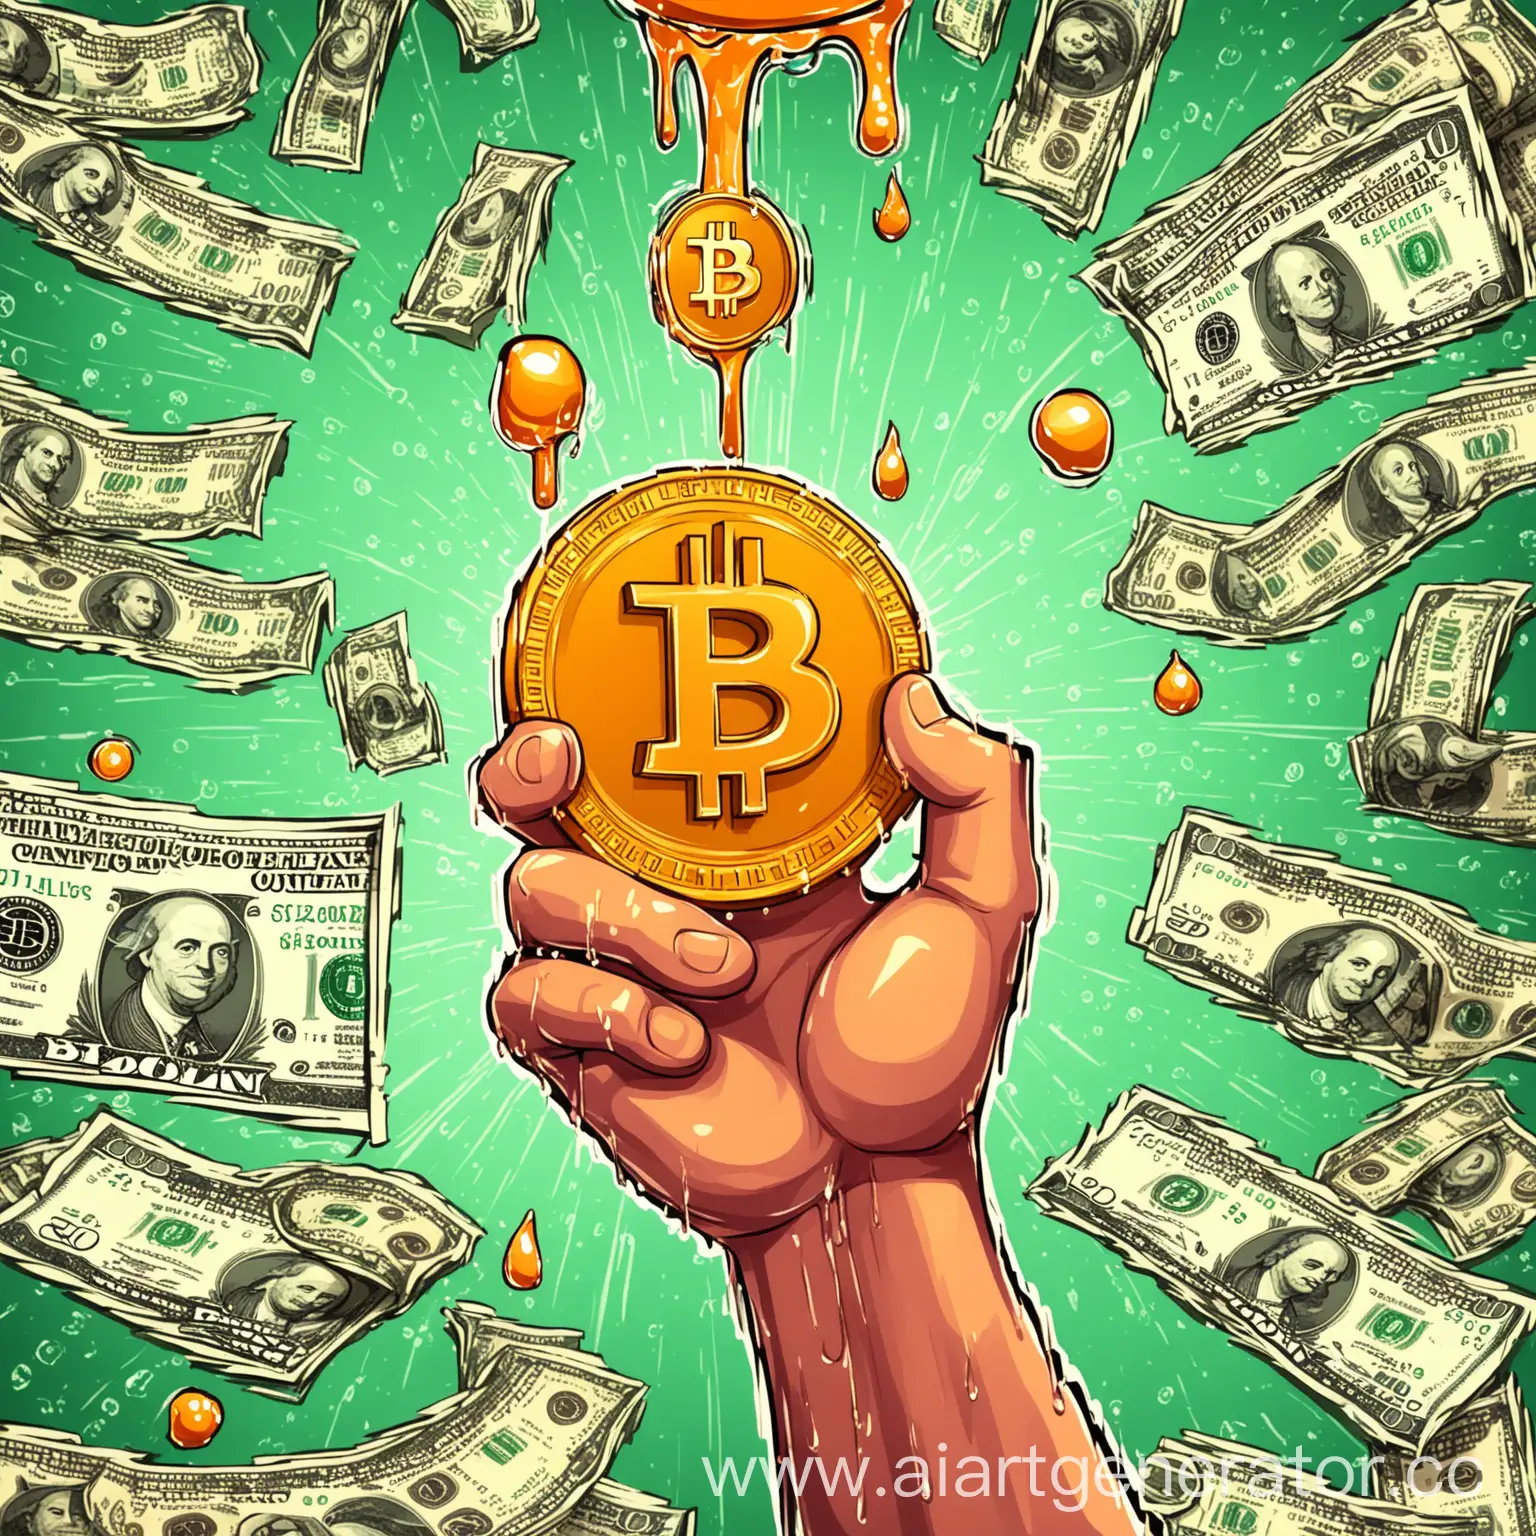 Create an avatar featuring a strong hand squeezing a Bitcoin, with dollars dripping from it. The hand should be the central element, and the background should be neutral to keep the focus on the main object. The style should be modern and vibrant